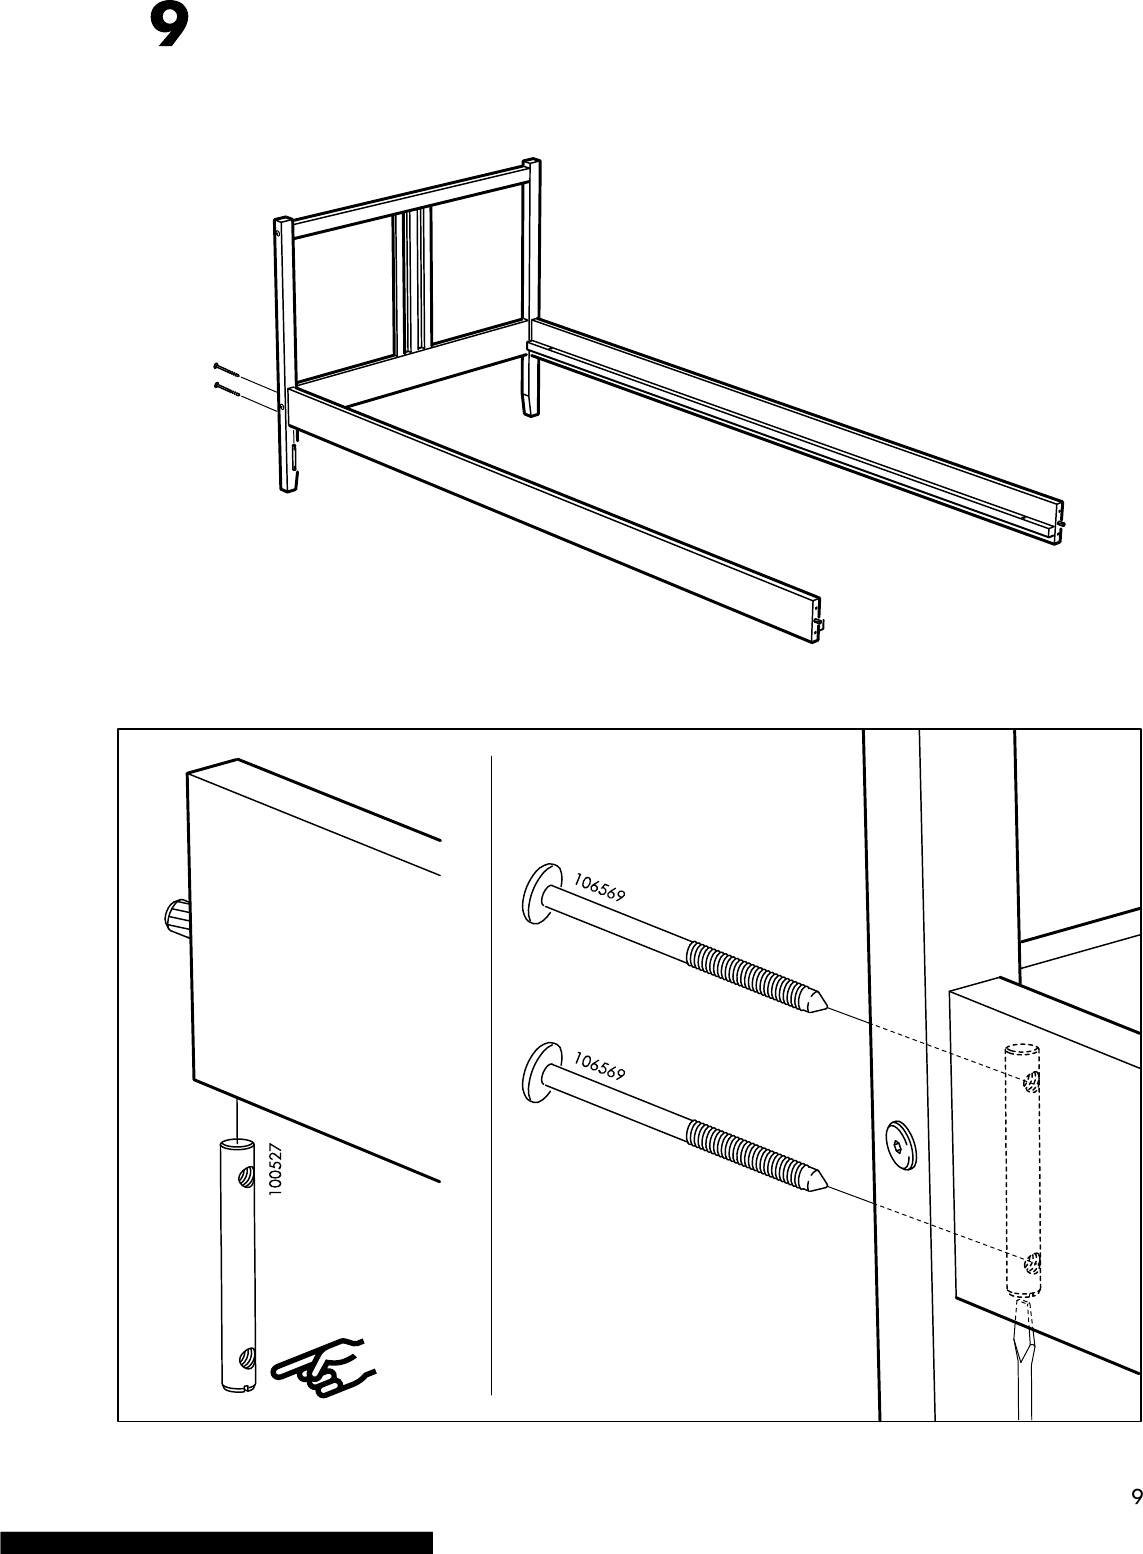 Page 9 of 12 - Ikea Ikea-Fjellse-Bed-Frame-Tw-Instructions-Manual-822426 ManualsLib - Makes It Easy To Find Manuals Online! User Manual